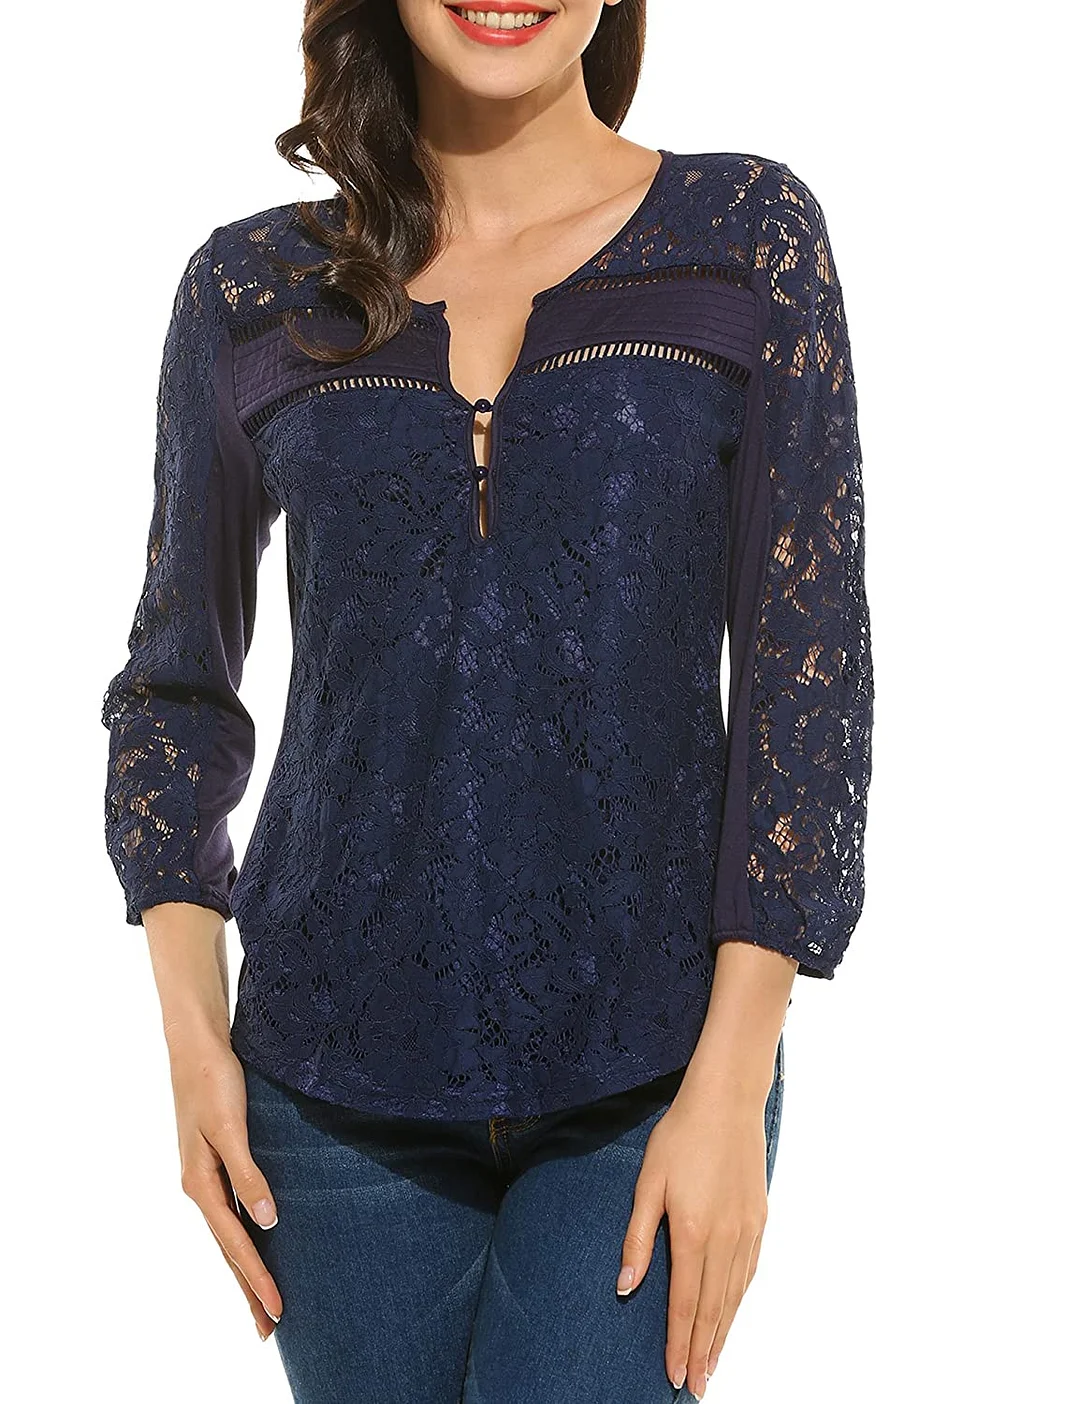 Women Casual V-Neck 3/4 Sleeve Floral Lace Button Blouse Tops